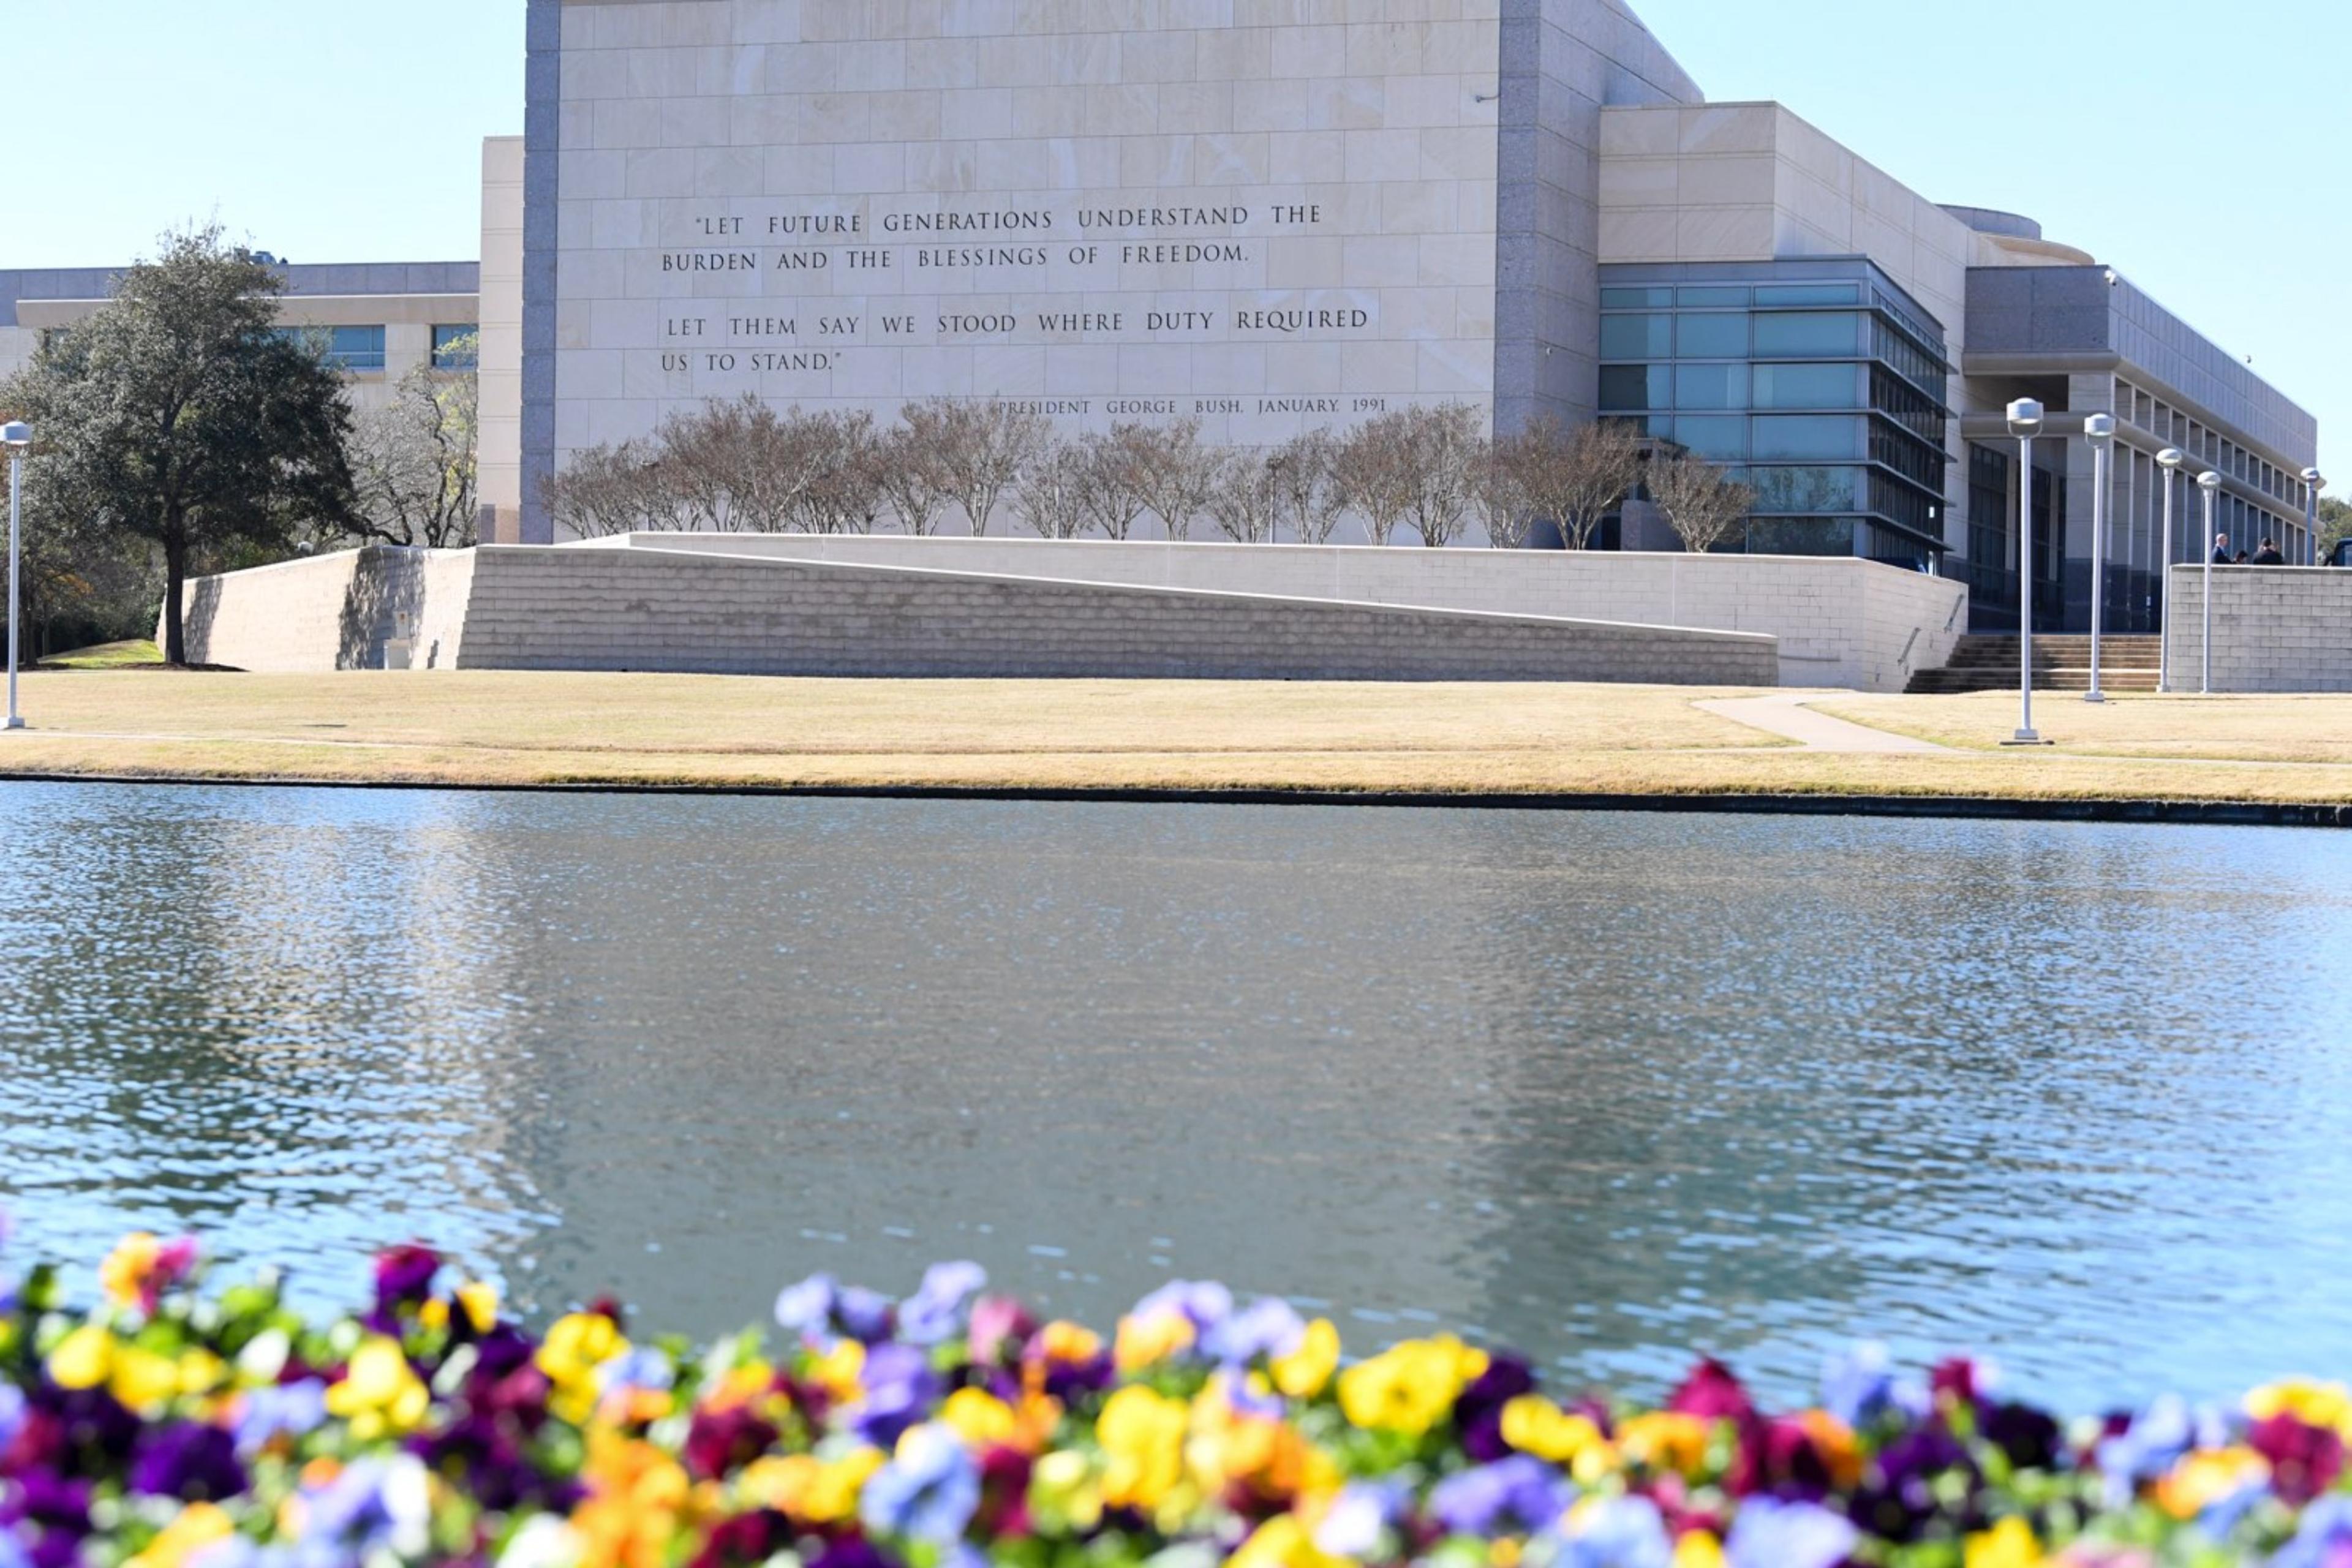 George H.W. Bush Presidential Library and Museum